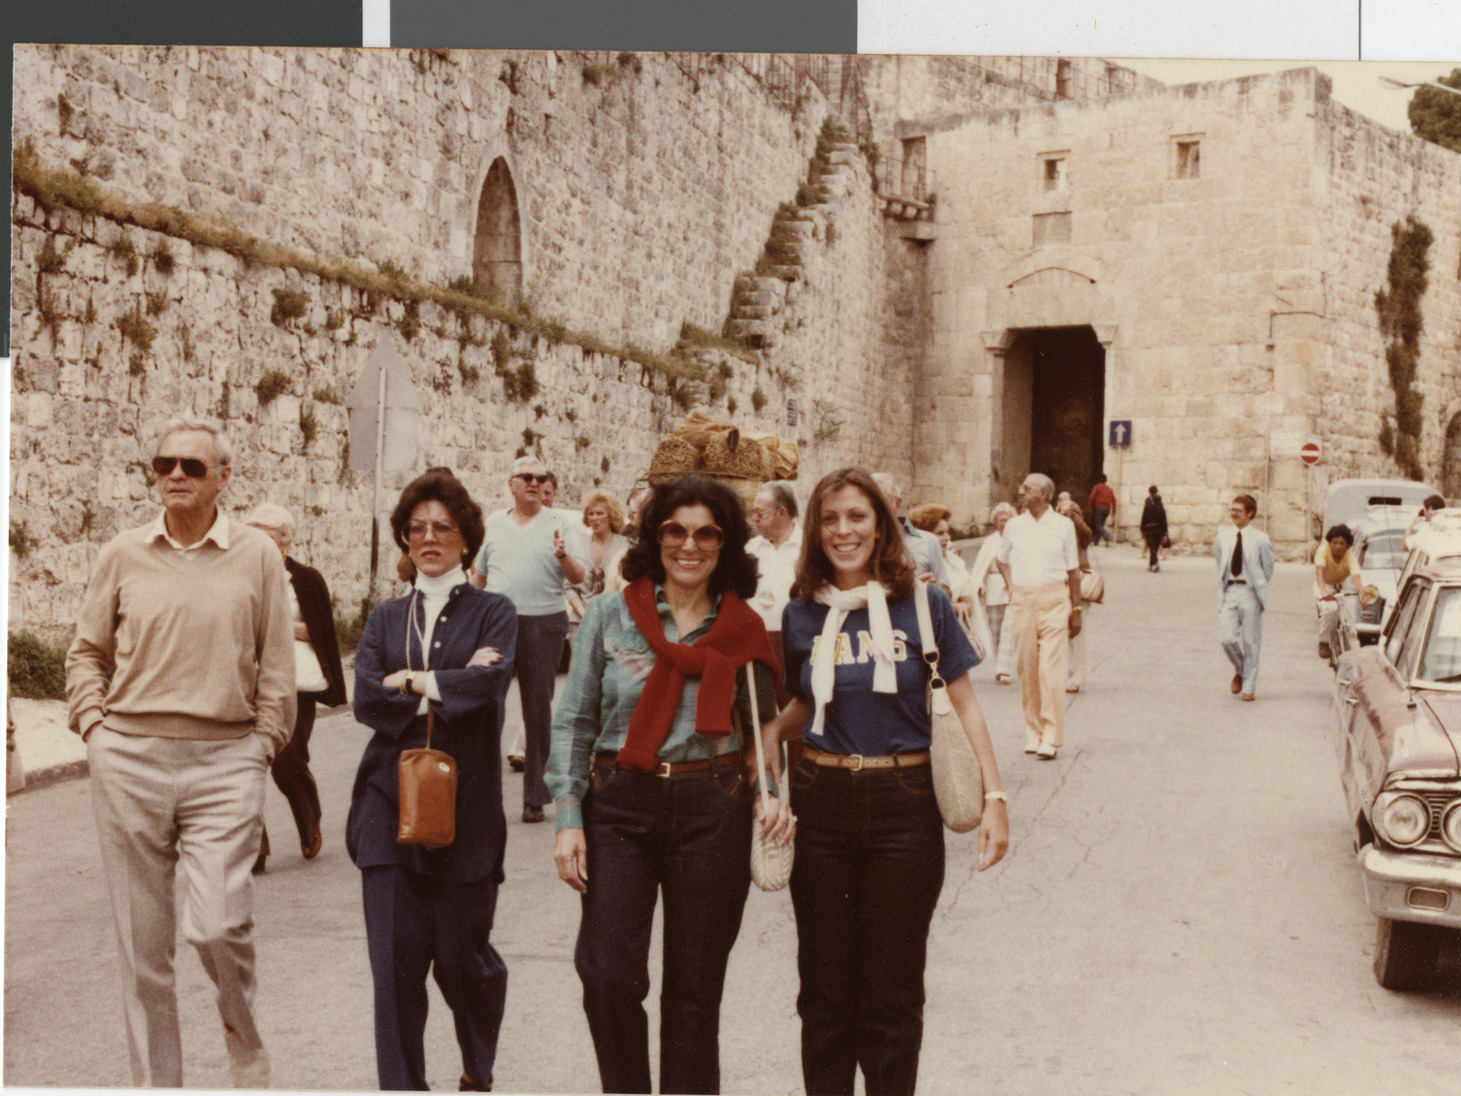 Photograph of group including Marilynn and Joyce Mack at the Western Wall, Jerusalem, 1979